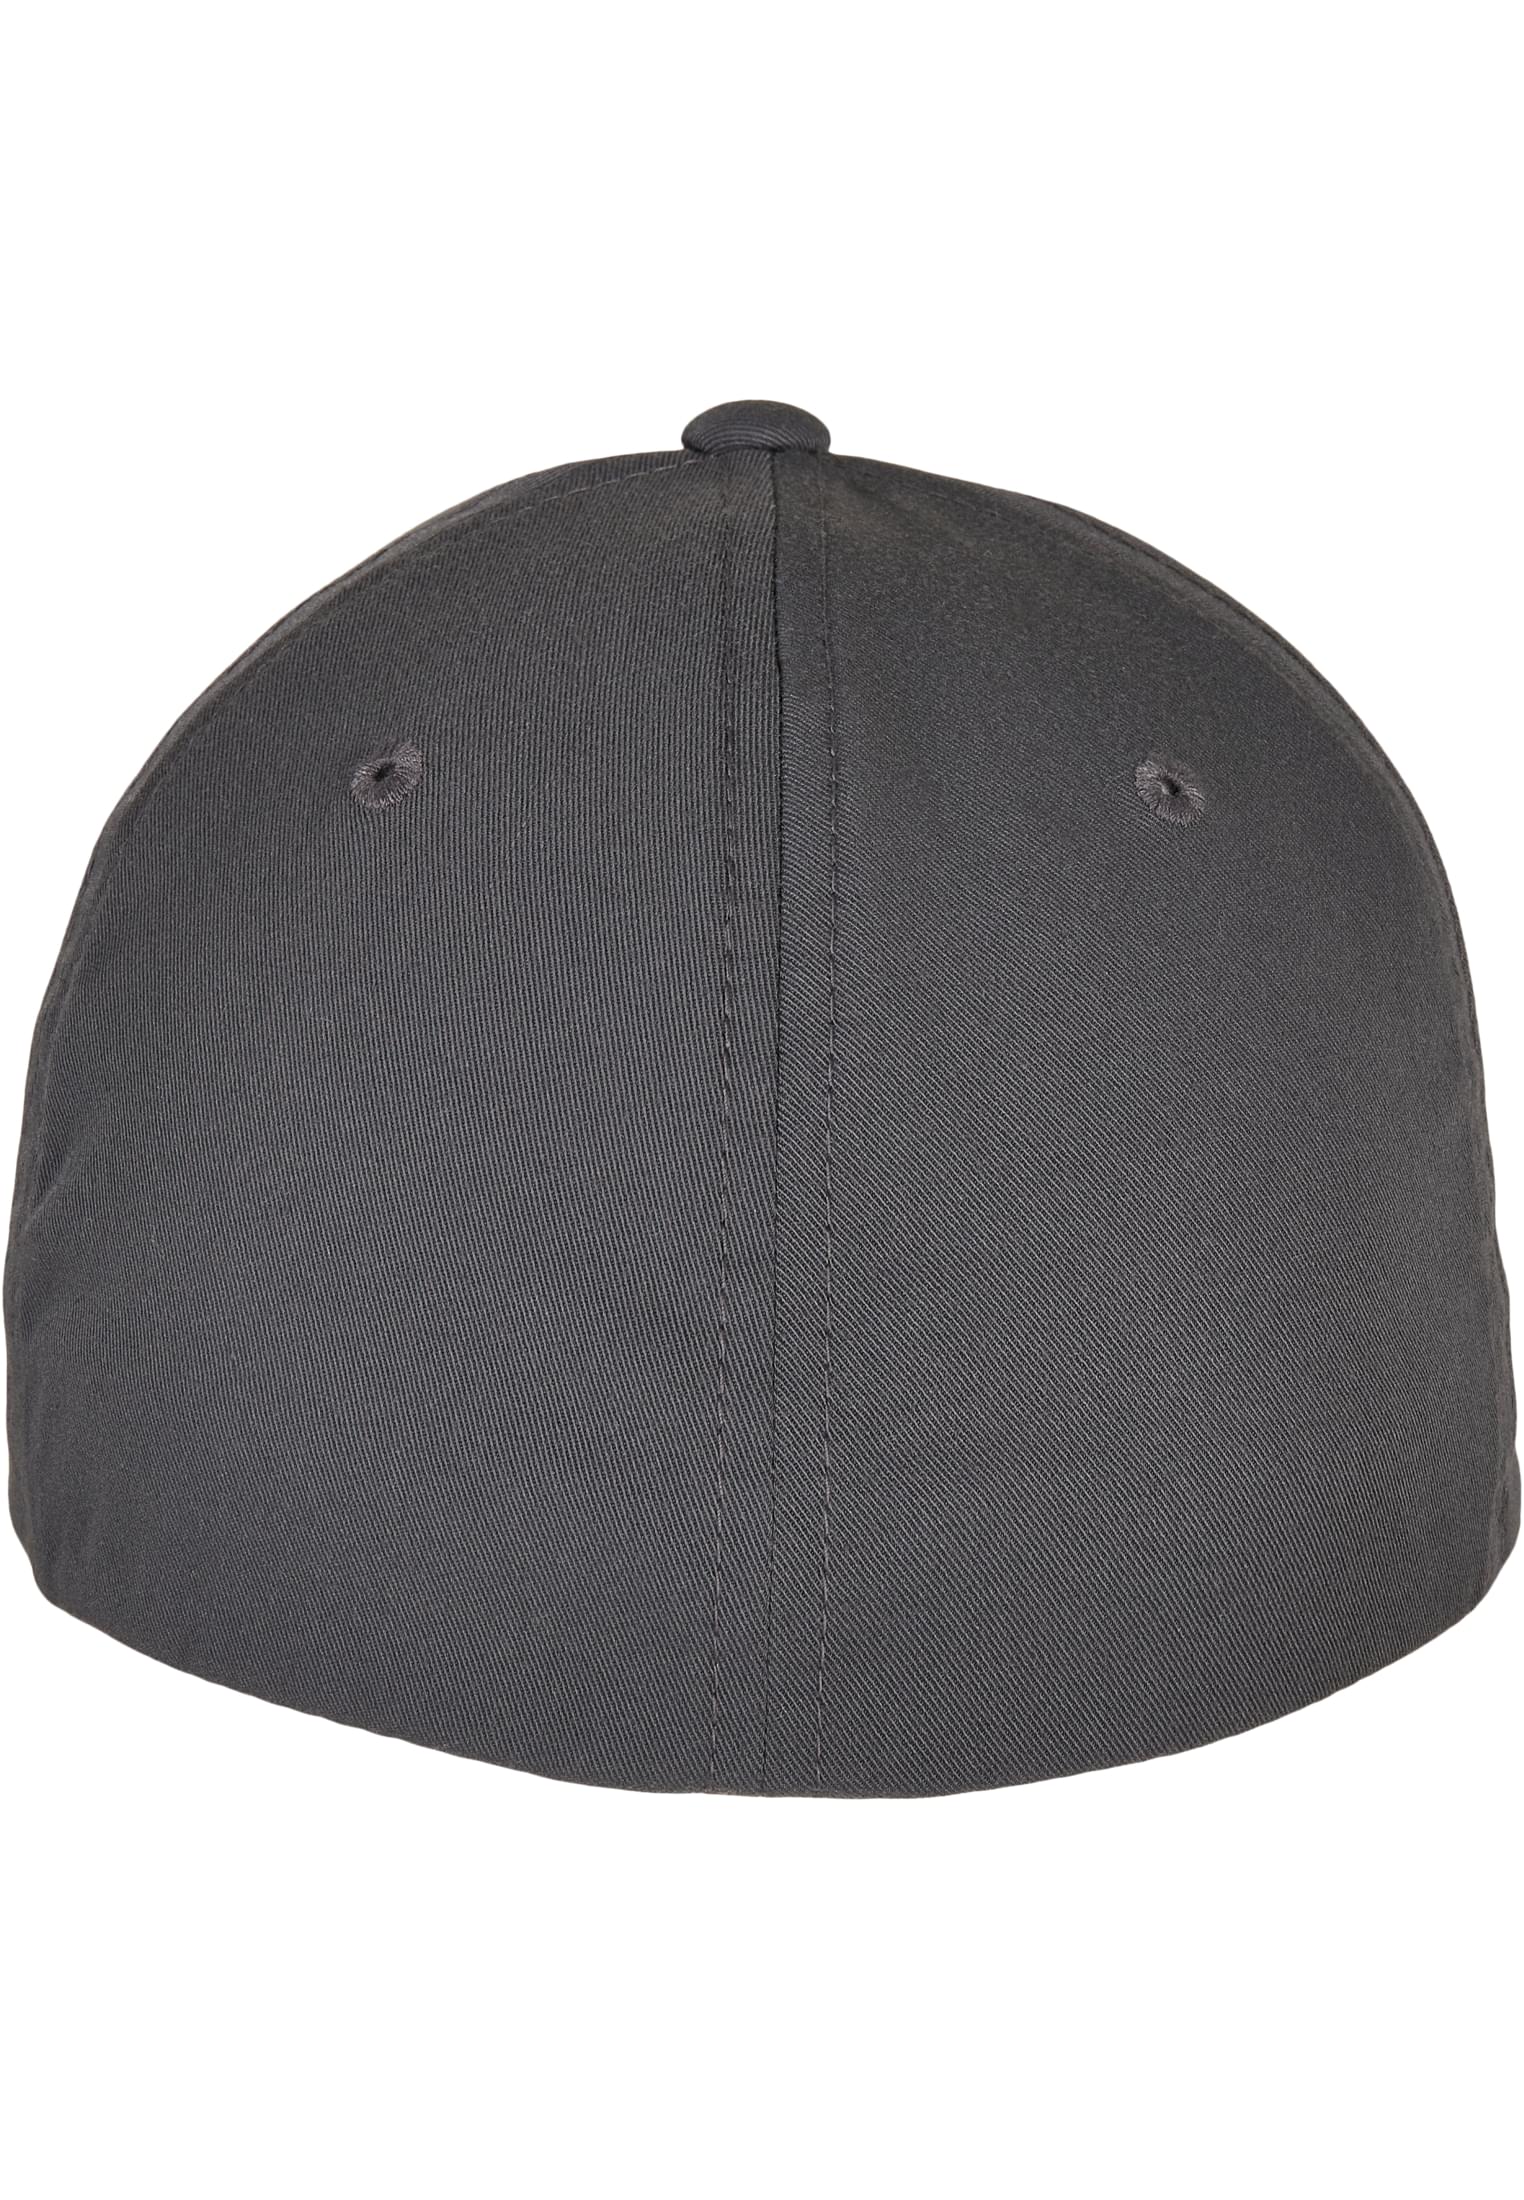 Nachhaltig Flexfit Recycled Polyester Cap in Farbe light charcoal